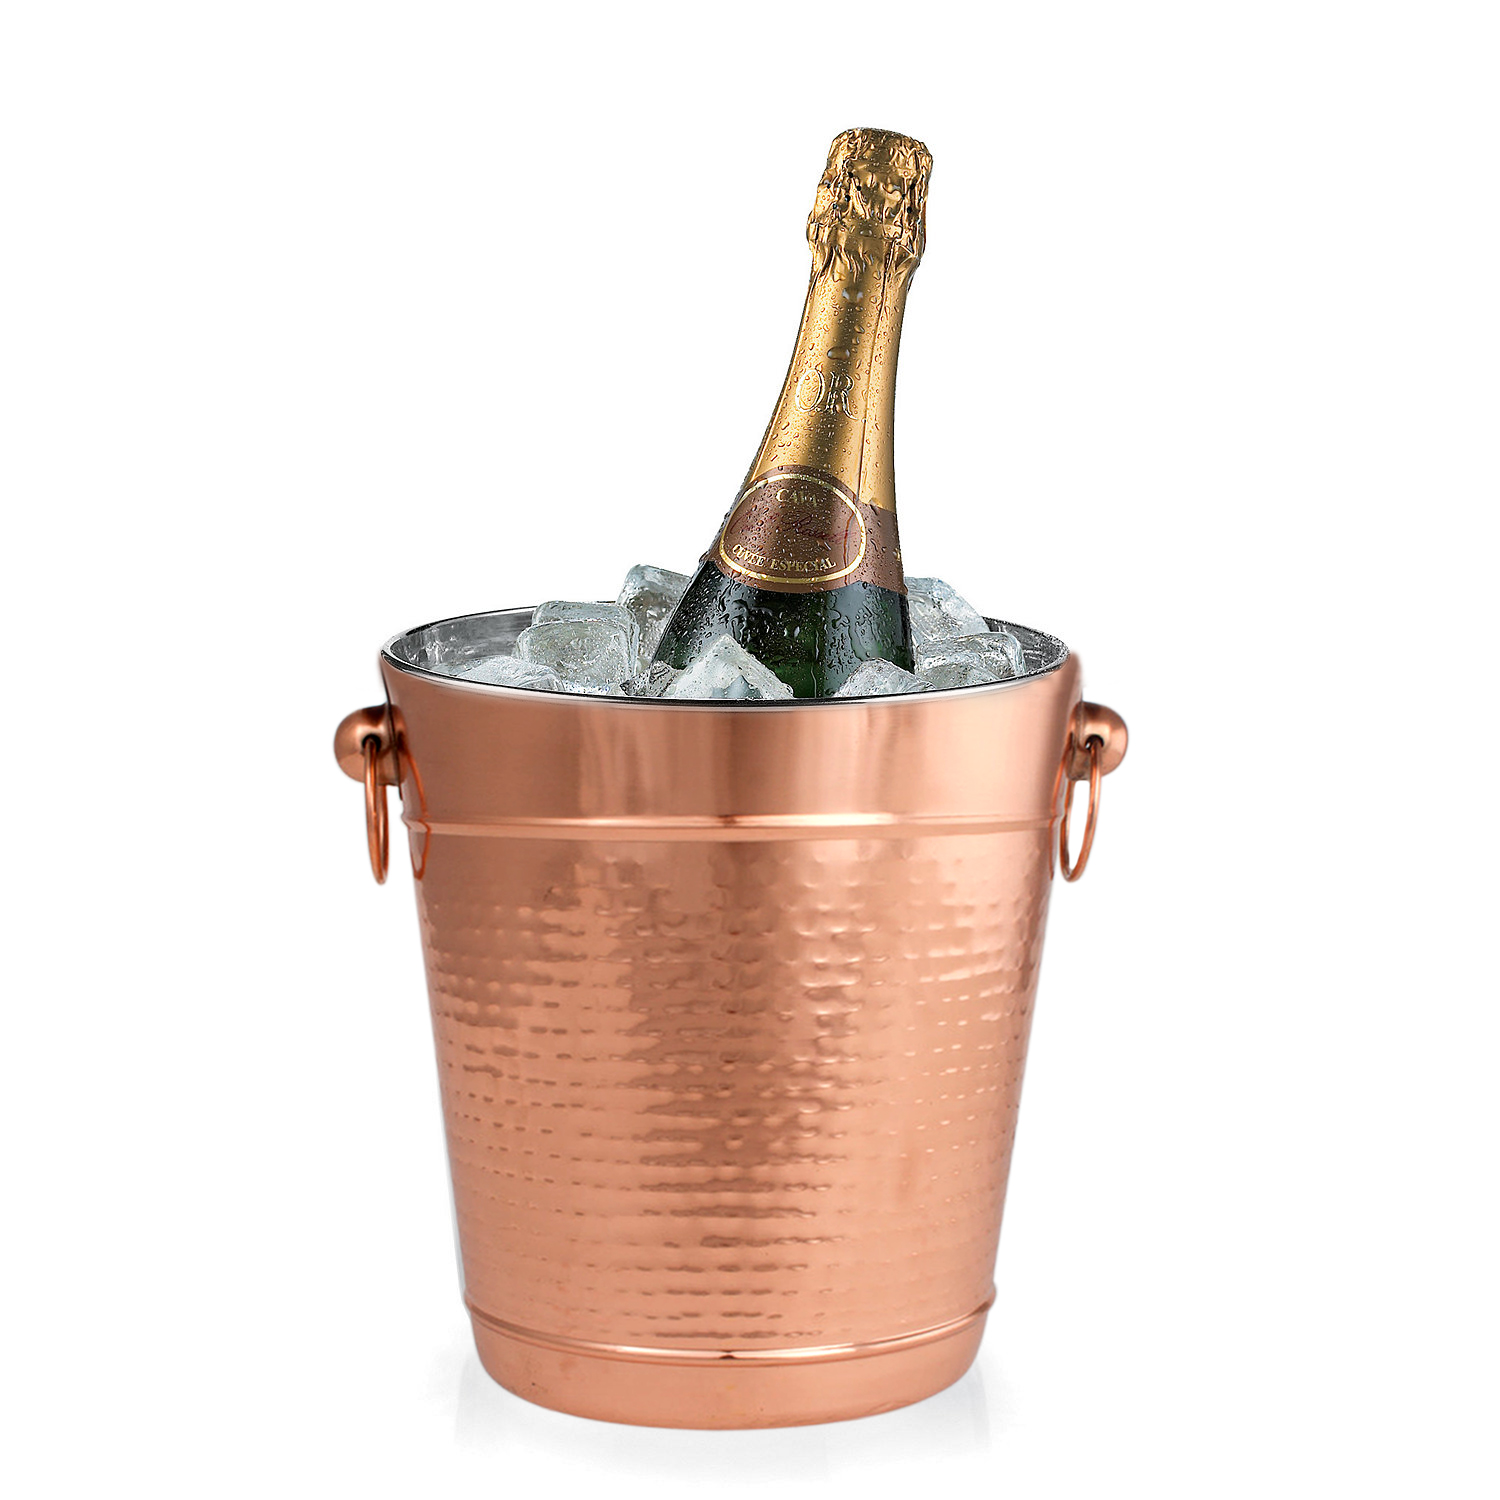 Copper Stainless Steel Champagne Bucket - Hammered Wine Bottle Cooler - Large Ice Bucket - image 1 of 1